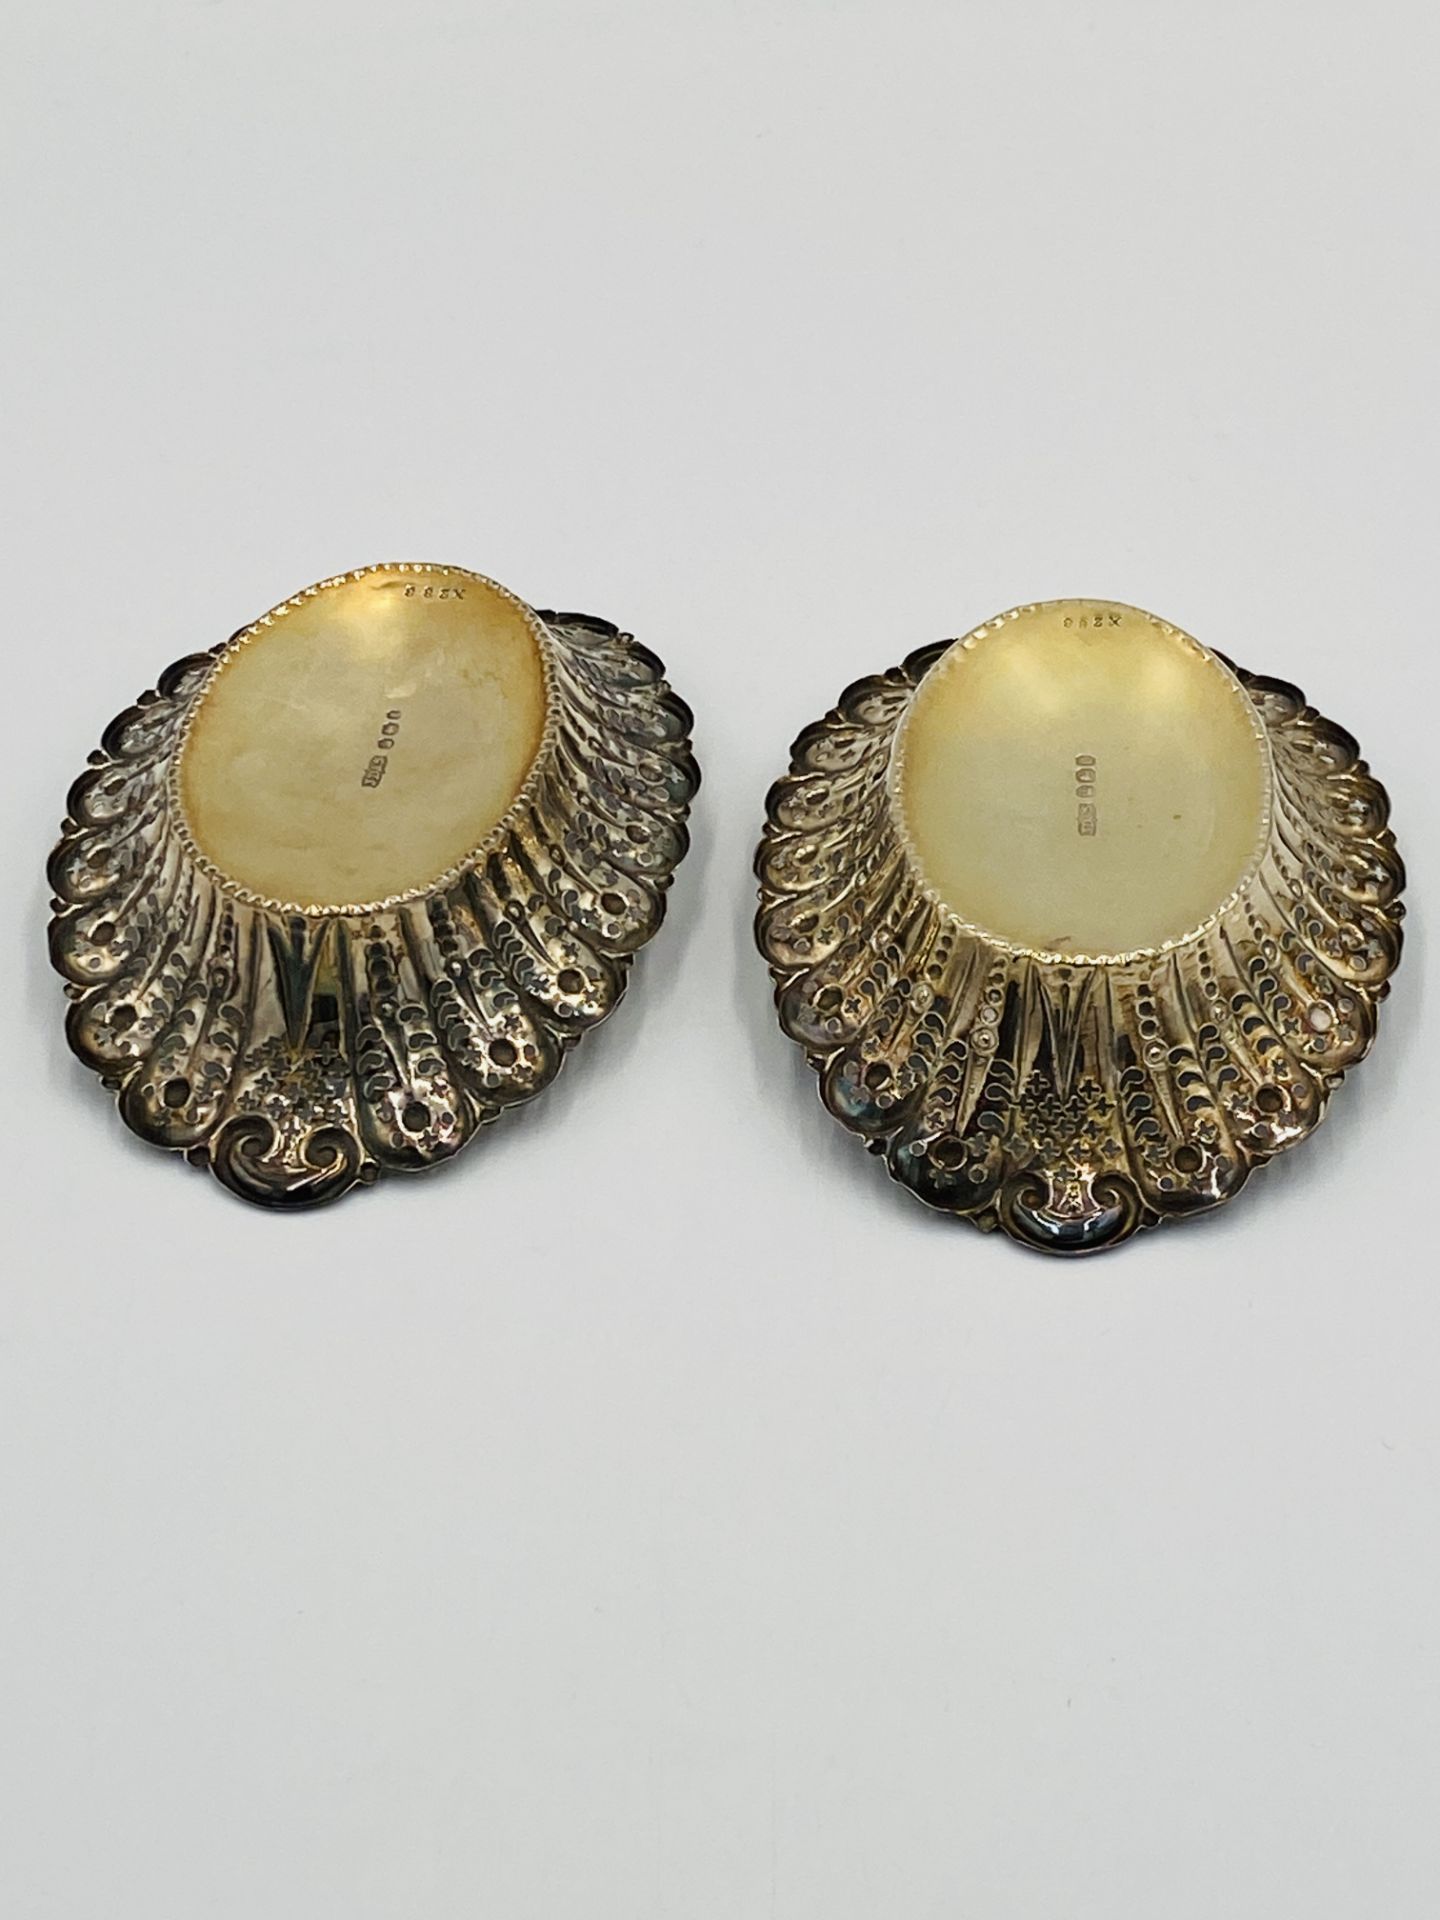 Pair of pierced silver bon bon dishes - Image 3 of 5